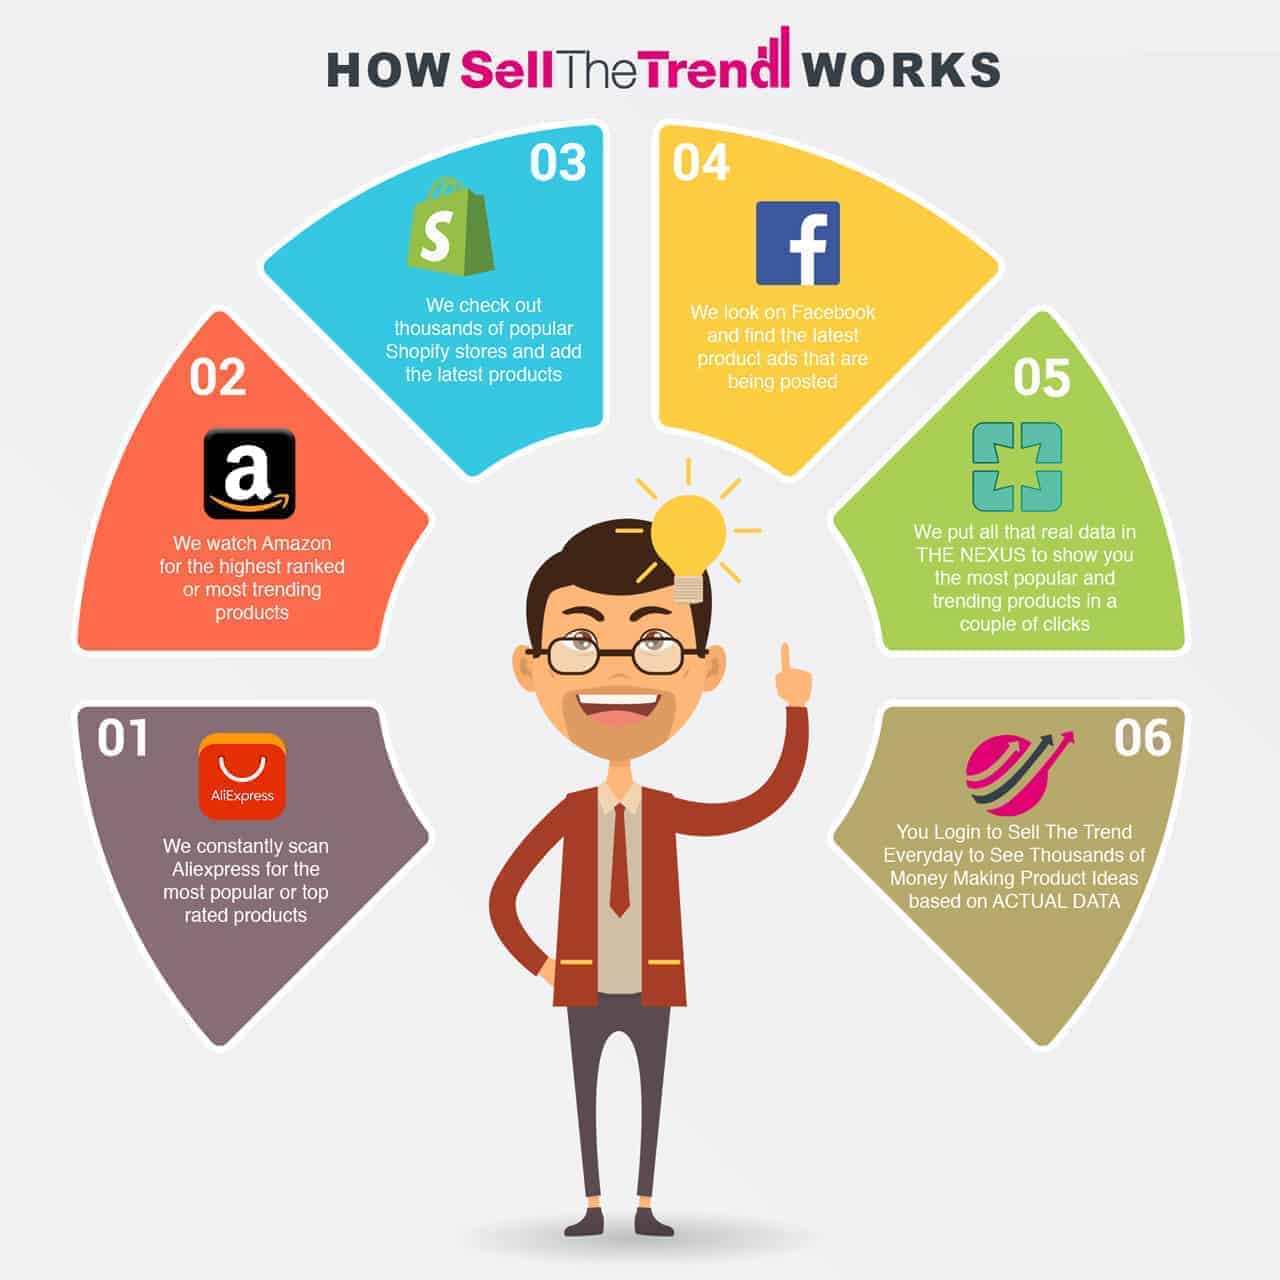 sell-the-trend-how-it-works